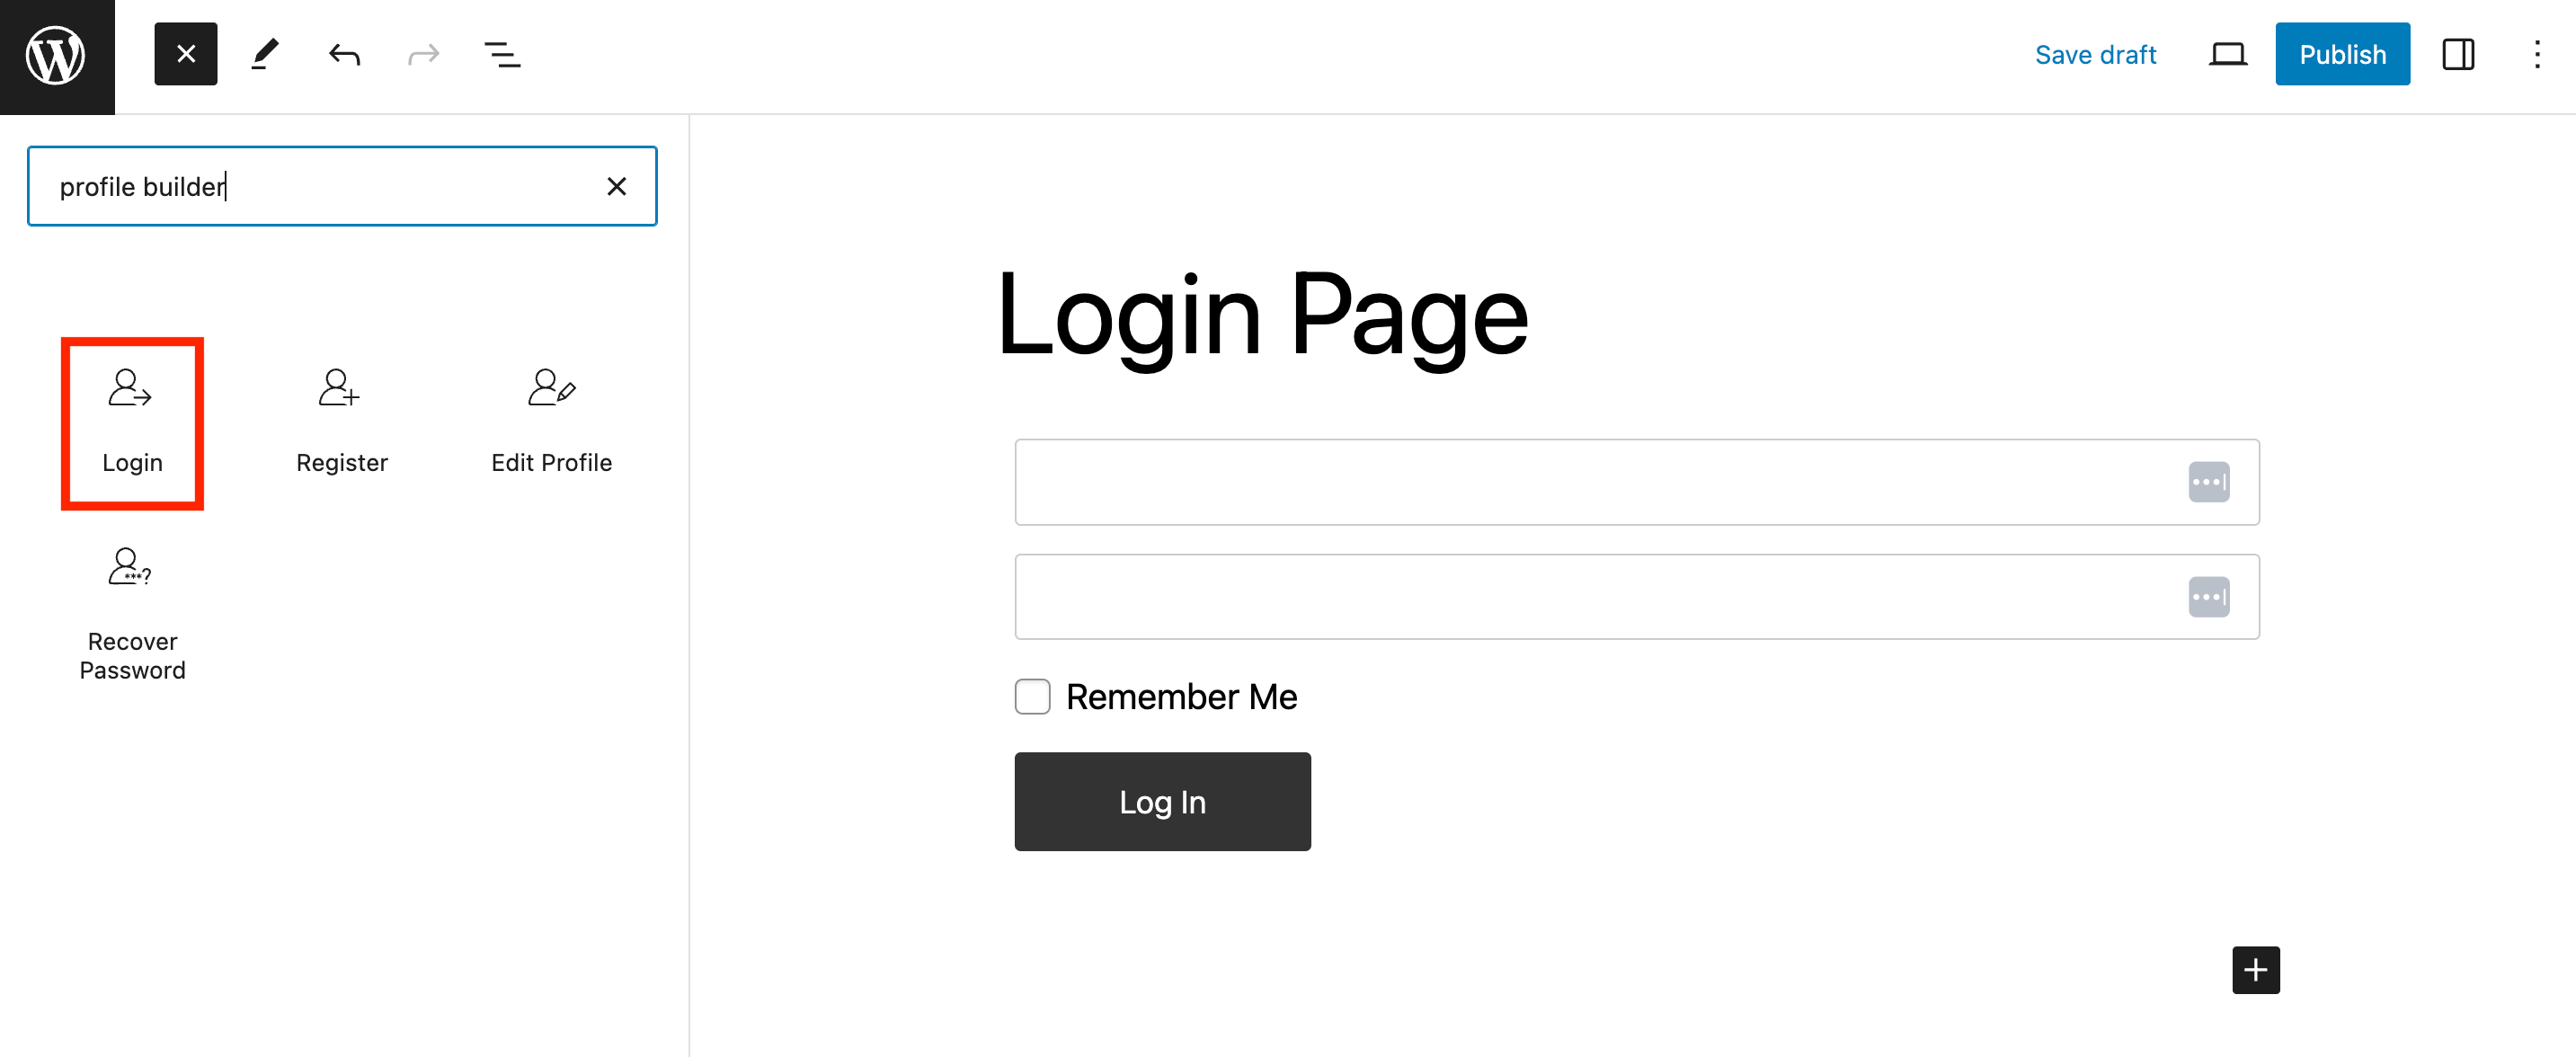 Creating a custom Login page in WordPress to password protect content